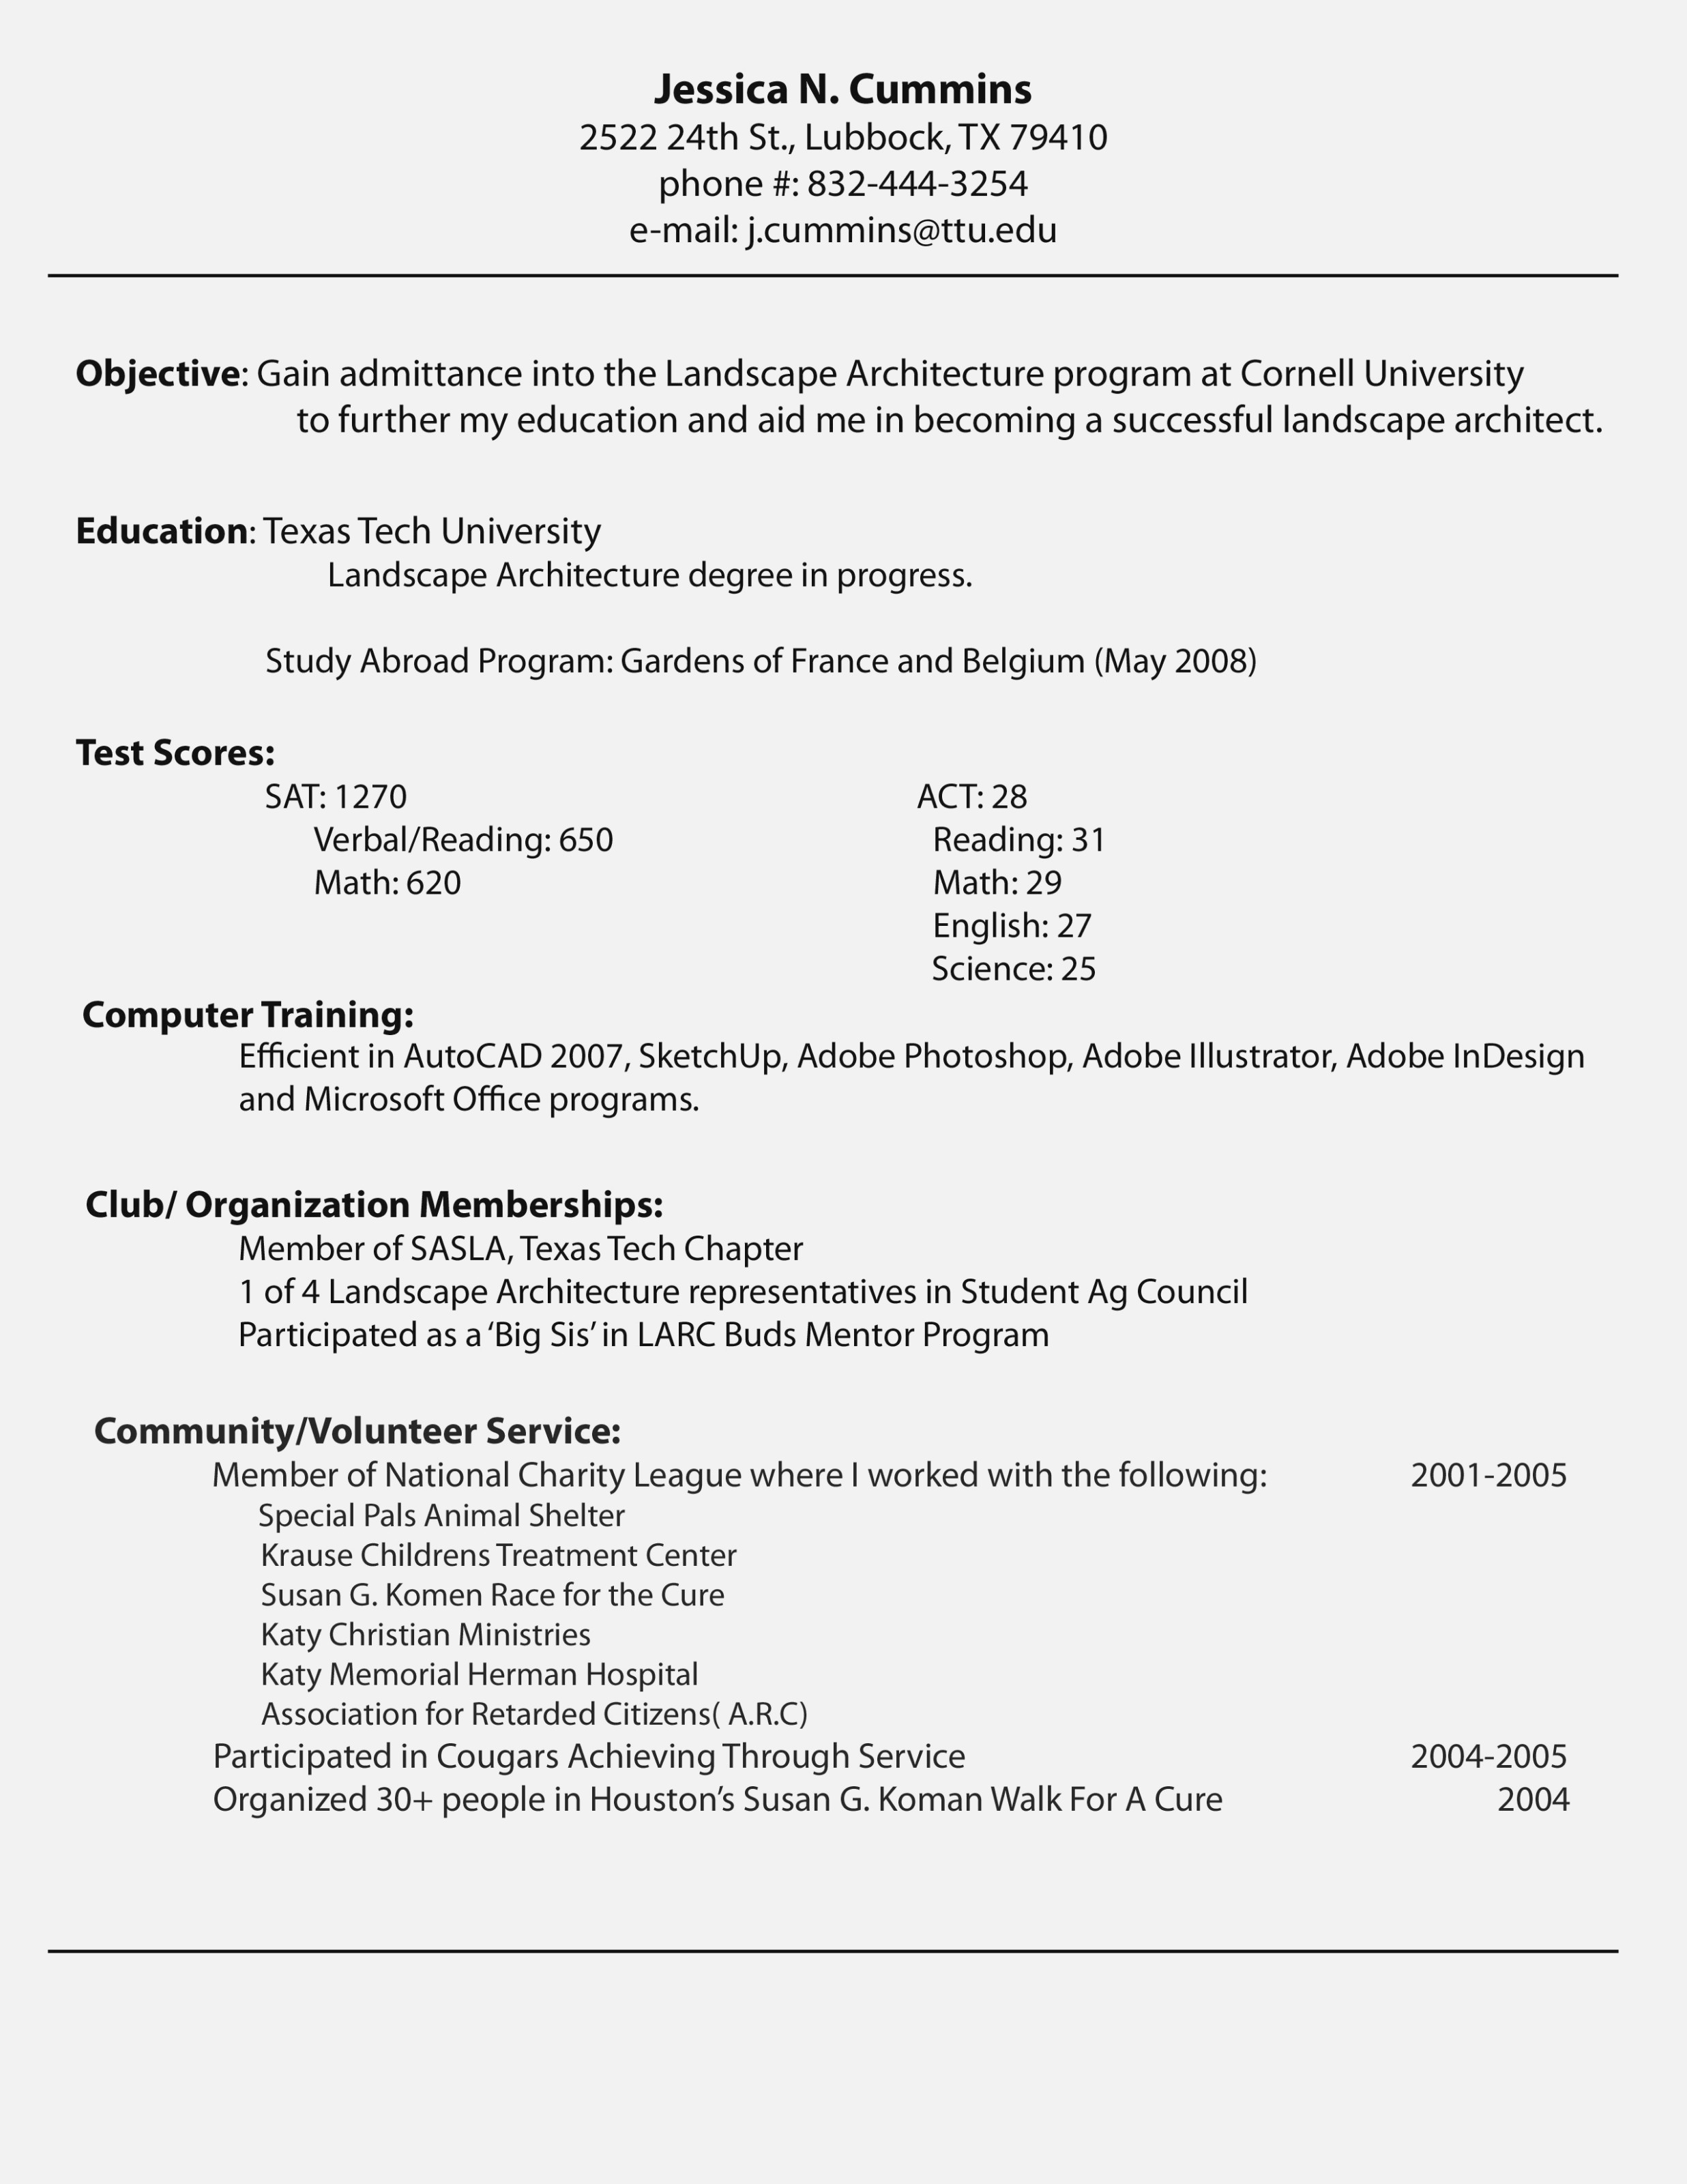 How To Create A Resume How To Make Resume For First Job With Example Sample Professional How To Make A Visually Appealing Resume how to create a resume|wikiresume.com